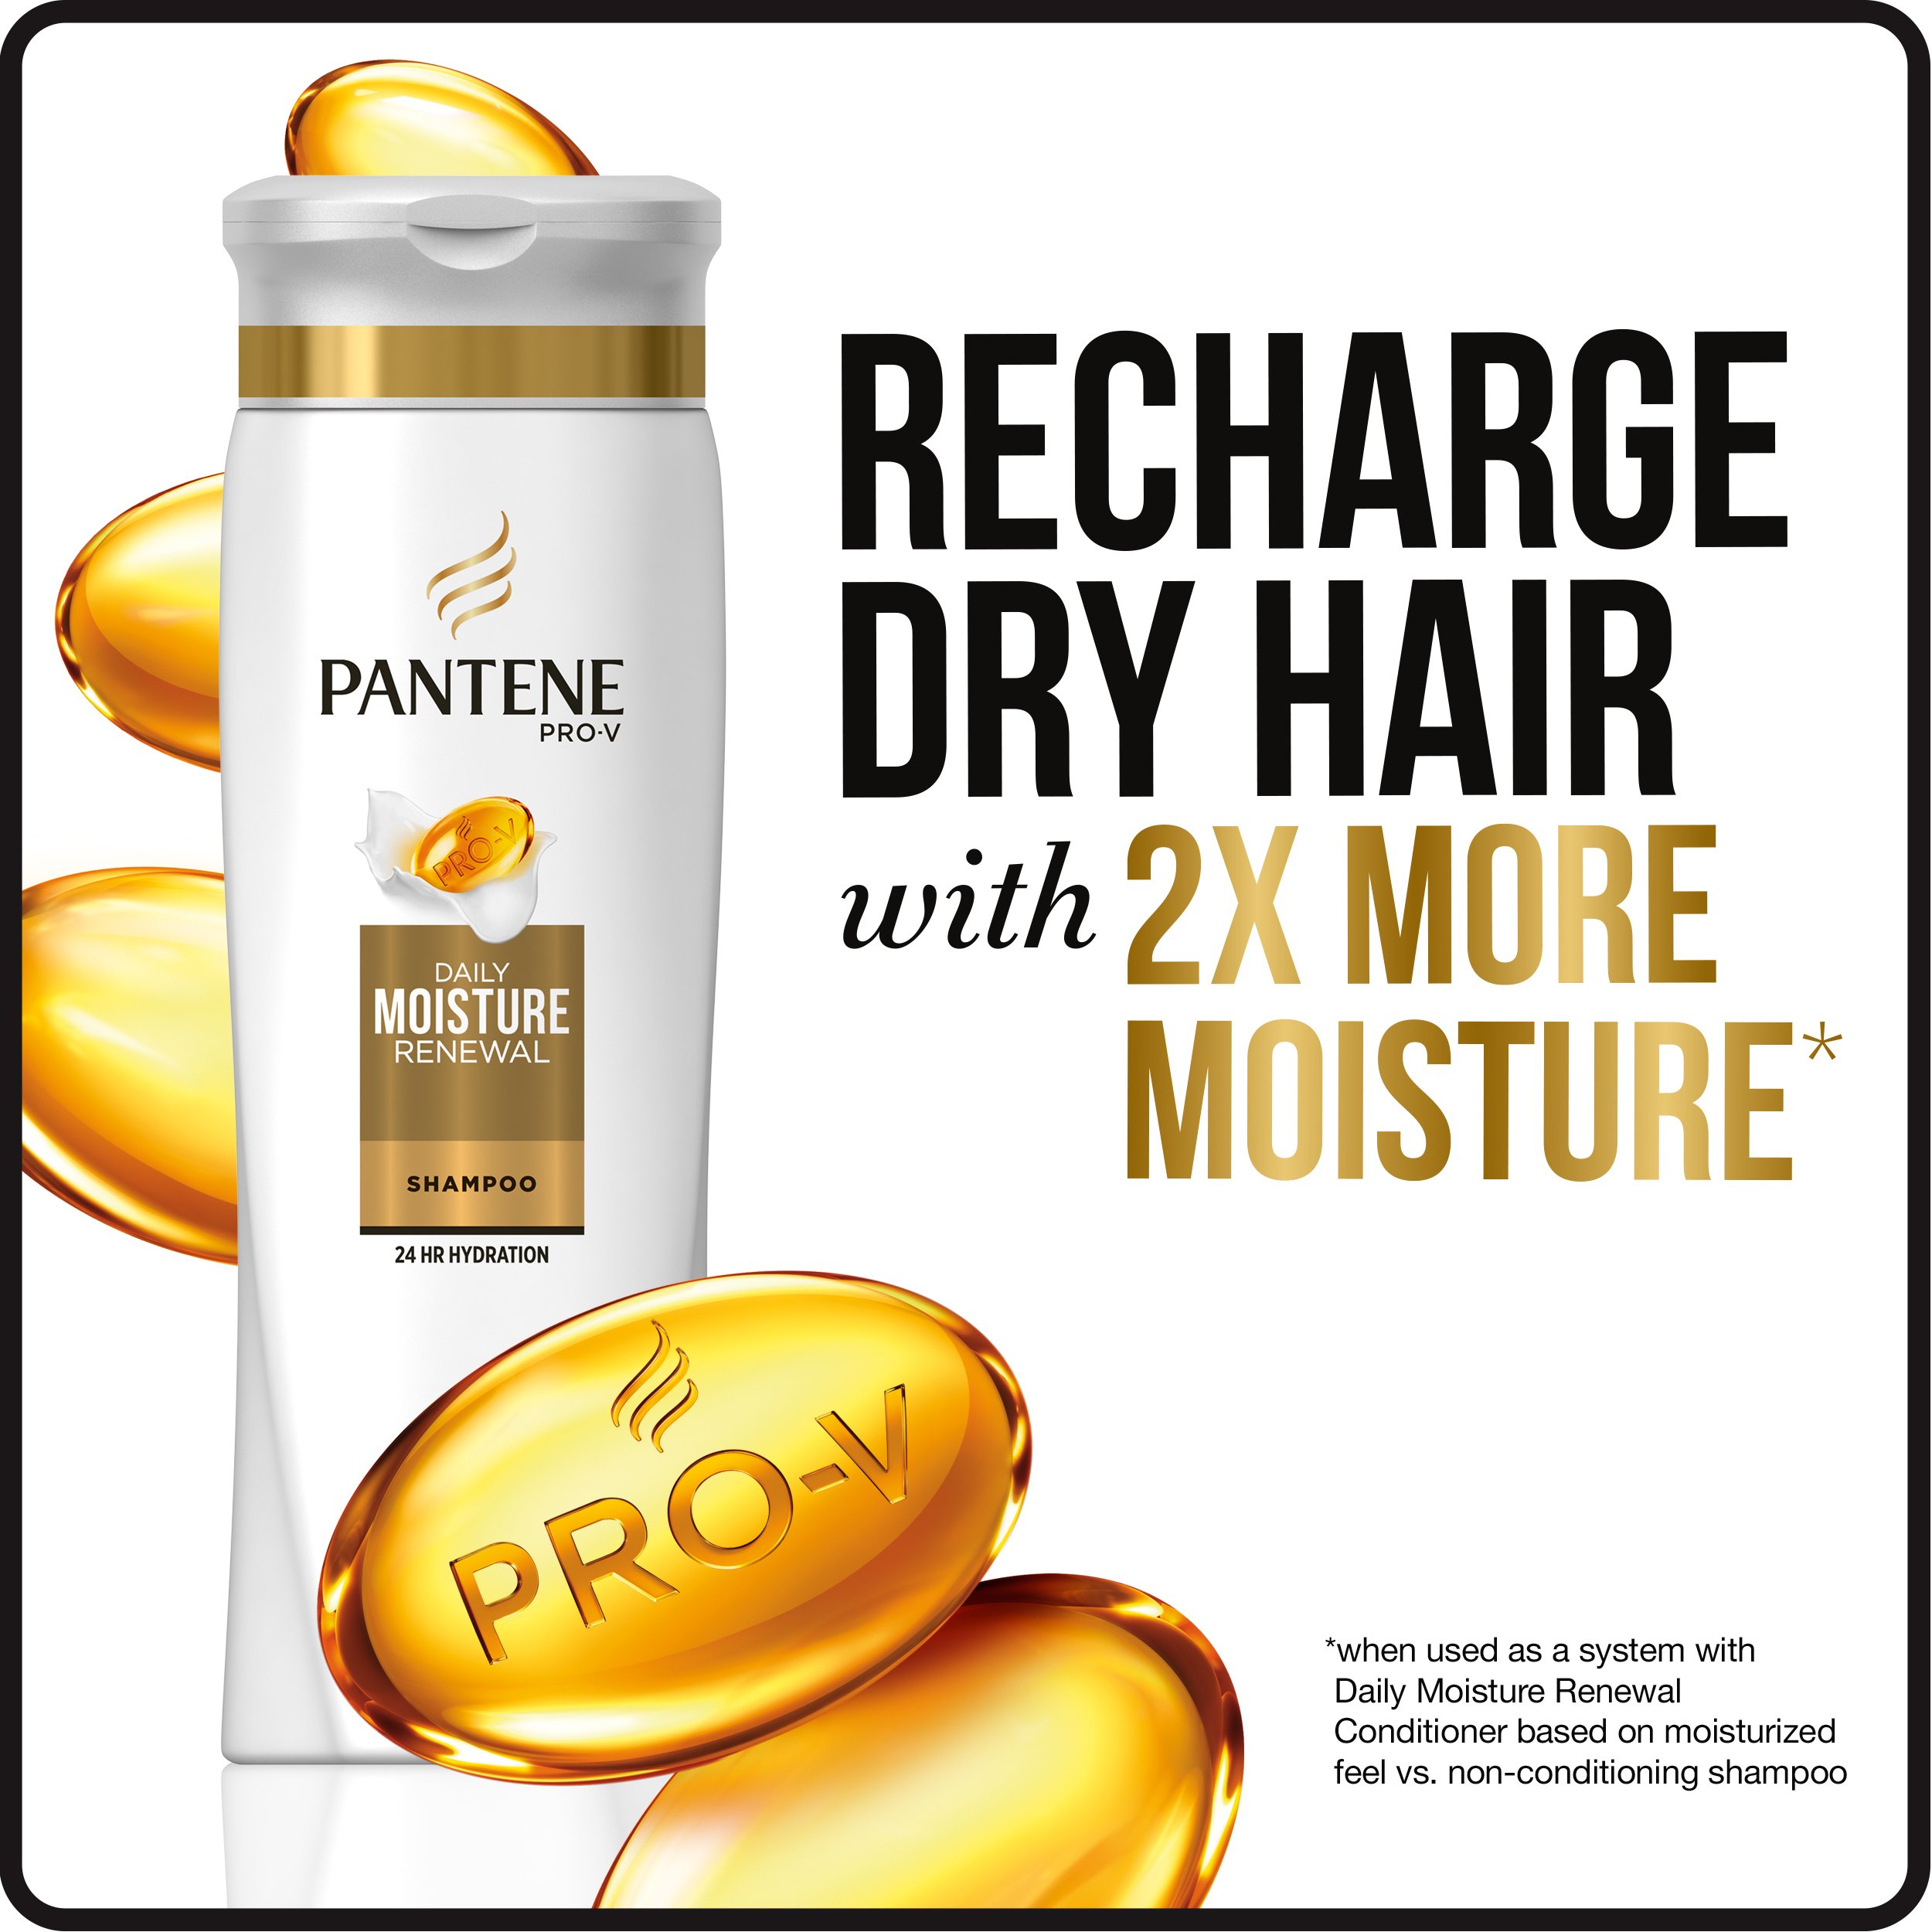 Pantene Dry Shampoo Foam, Sulfate Free, Dry Conditioner and No Cruch Hairspray, Pro-V Cheat Day, Mist Behaving, 25.4 Fl Oz (Pack of 1)